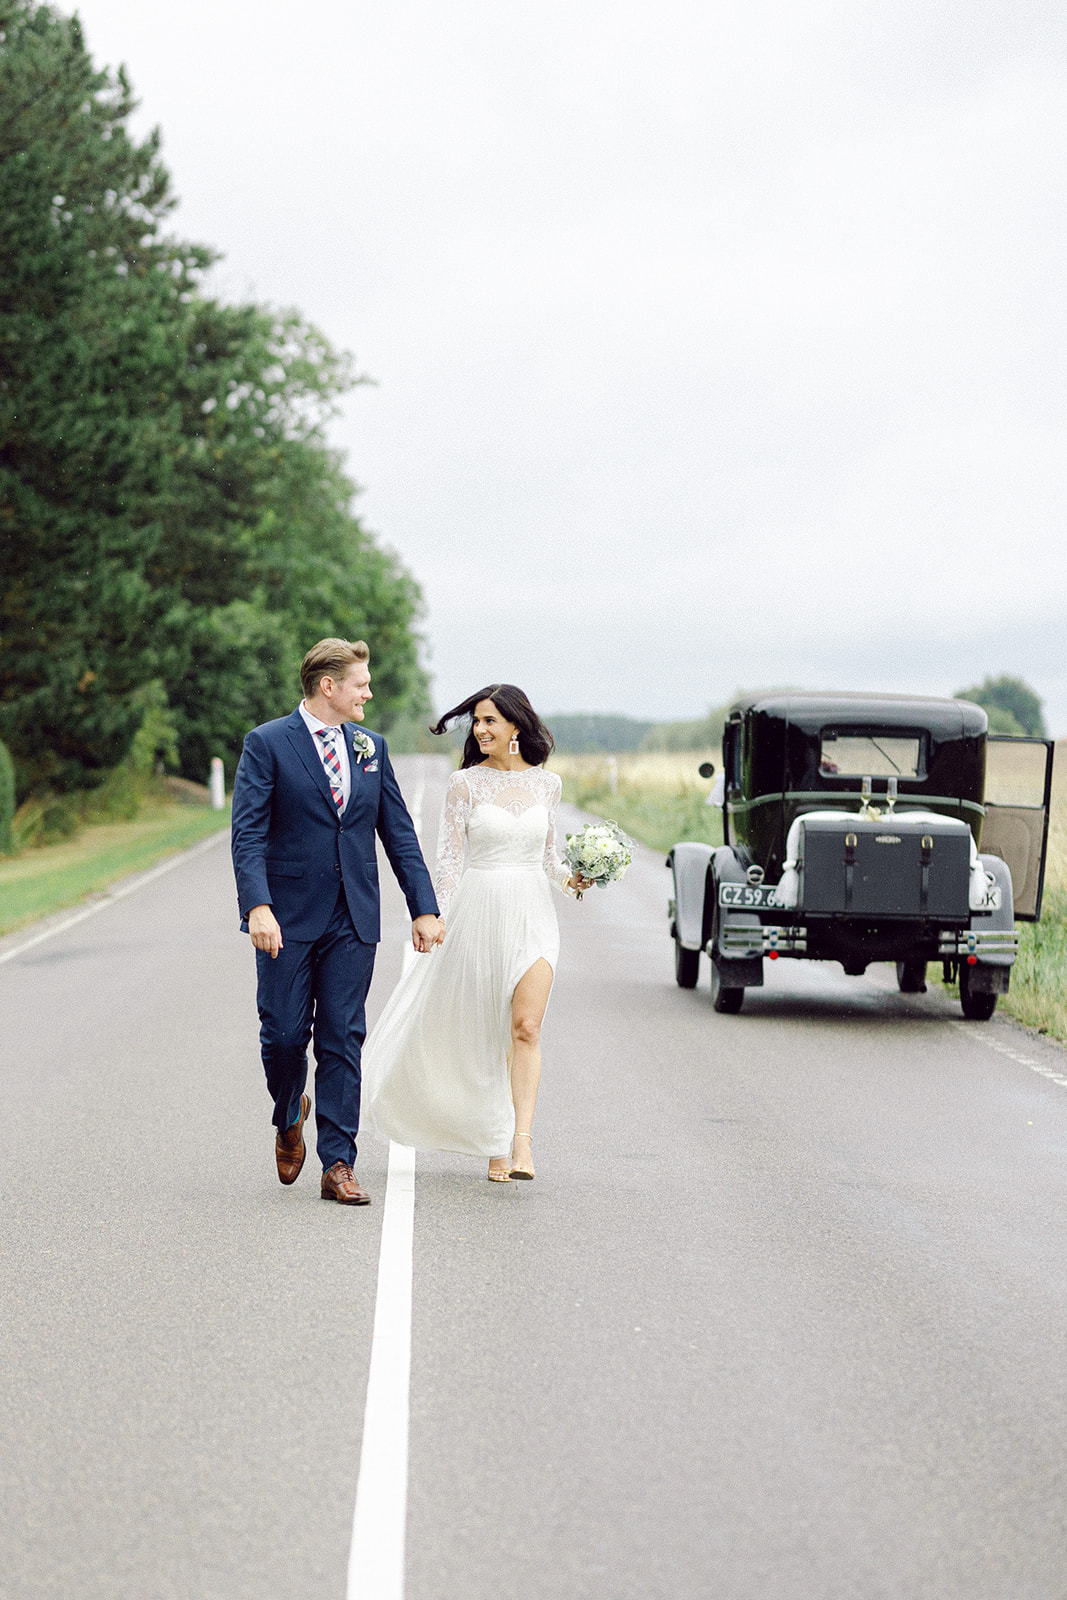 At the heart of Denmark, a Danish-American couple finds their forever love.  Walking on a road freely and happy.